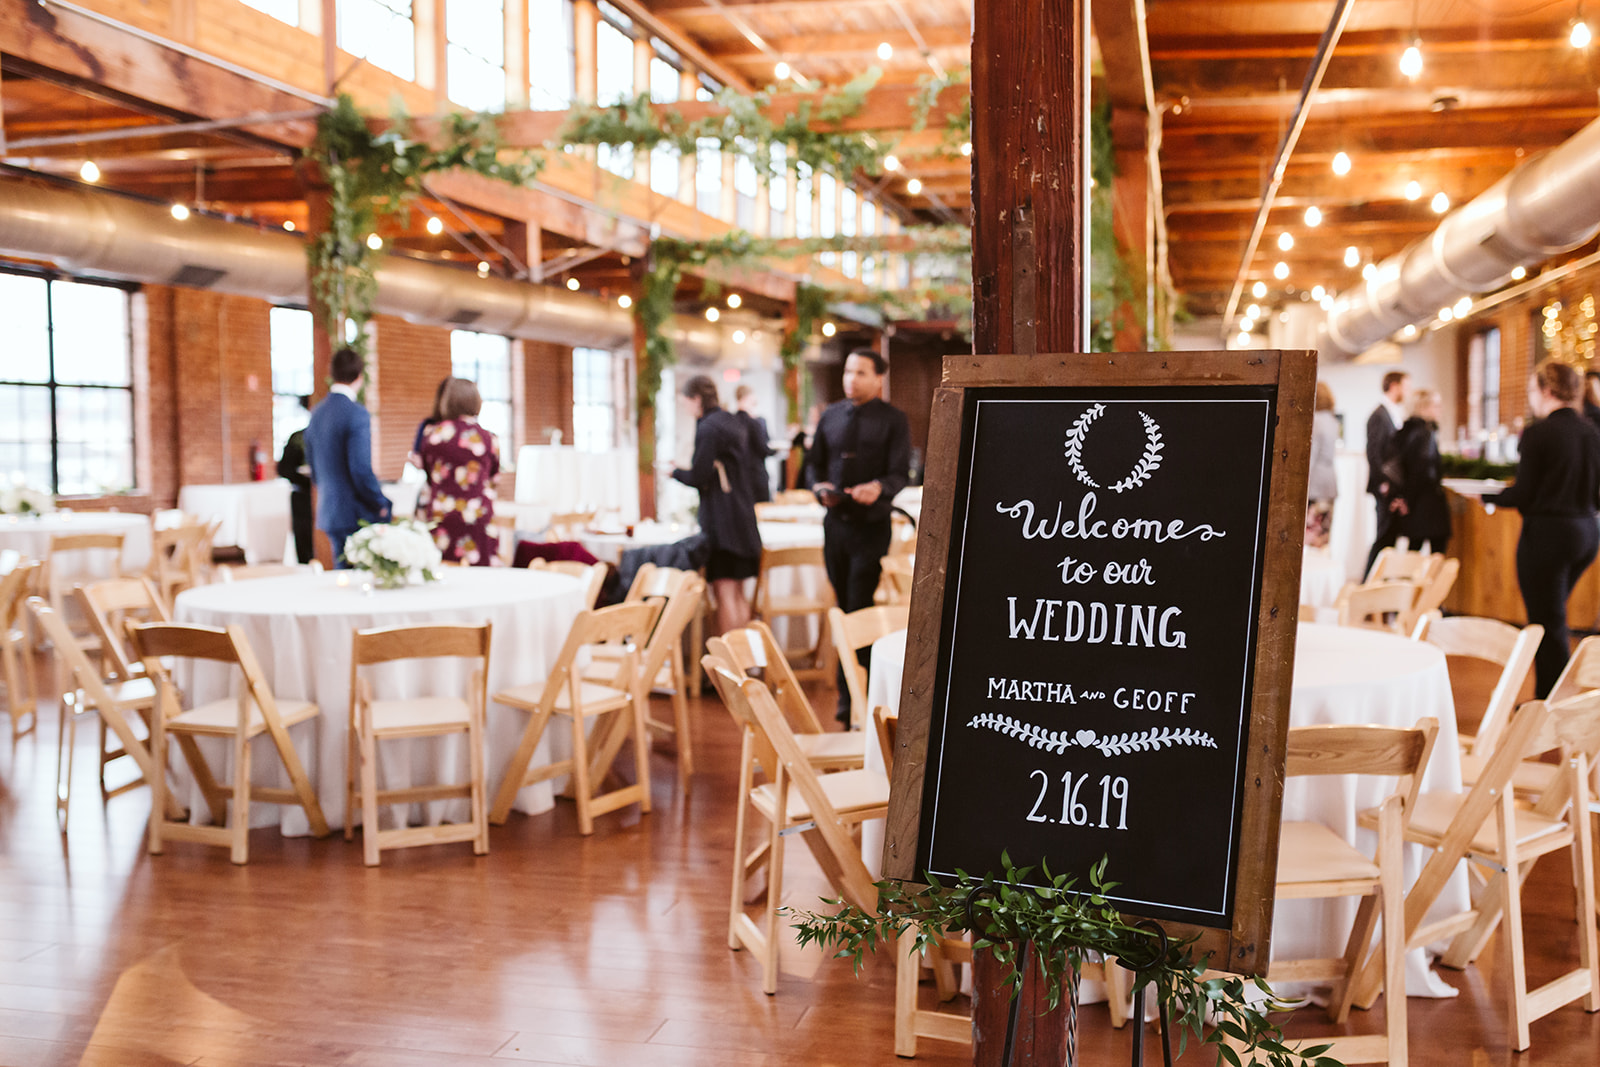 A sign welcoming guests to a wedding reception at The Turnbull Building.